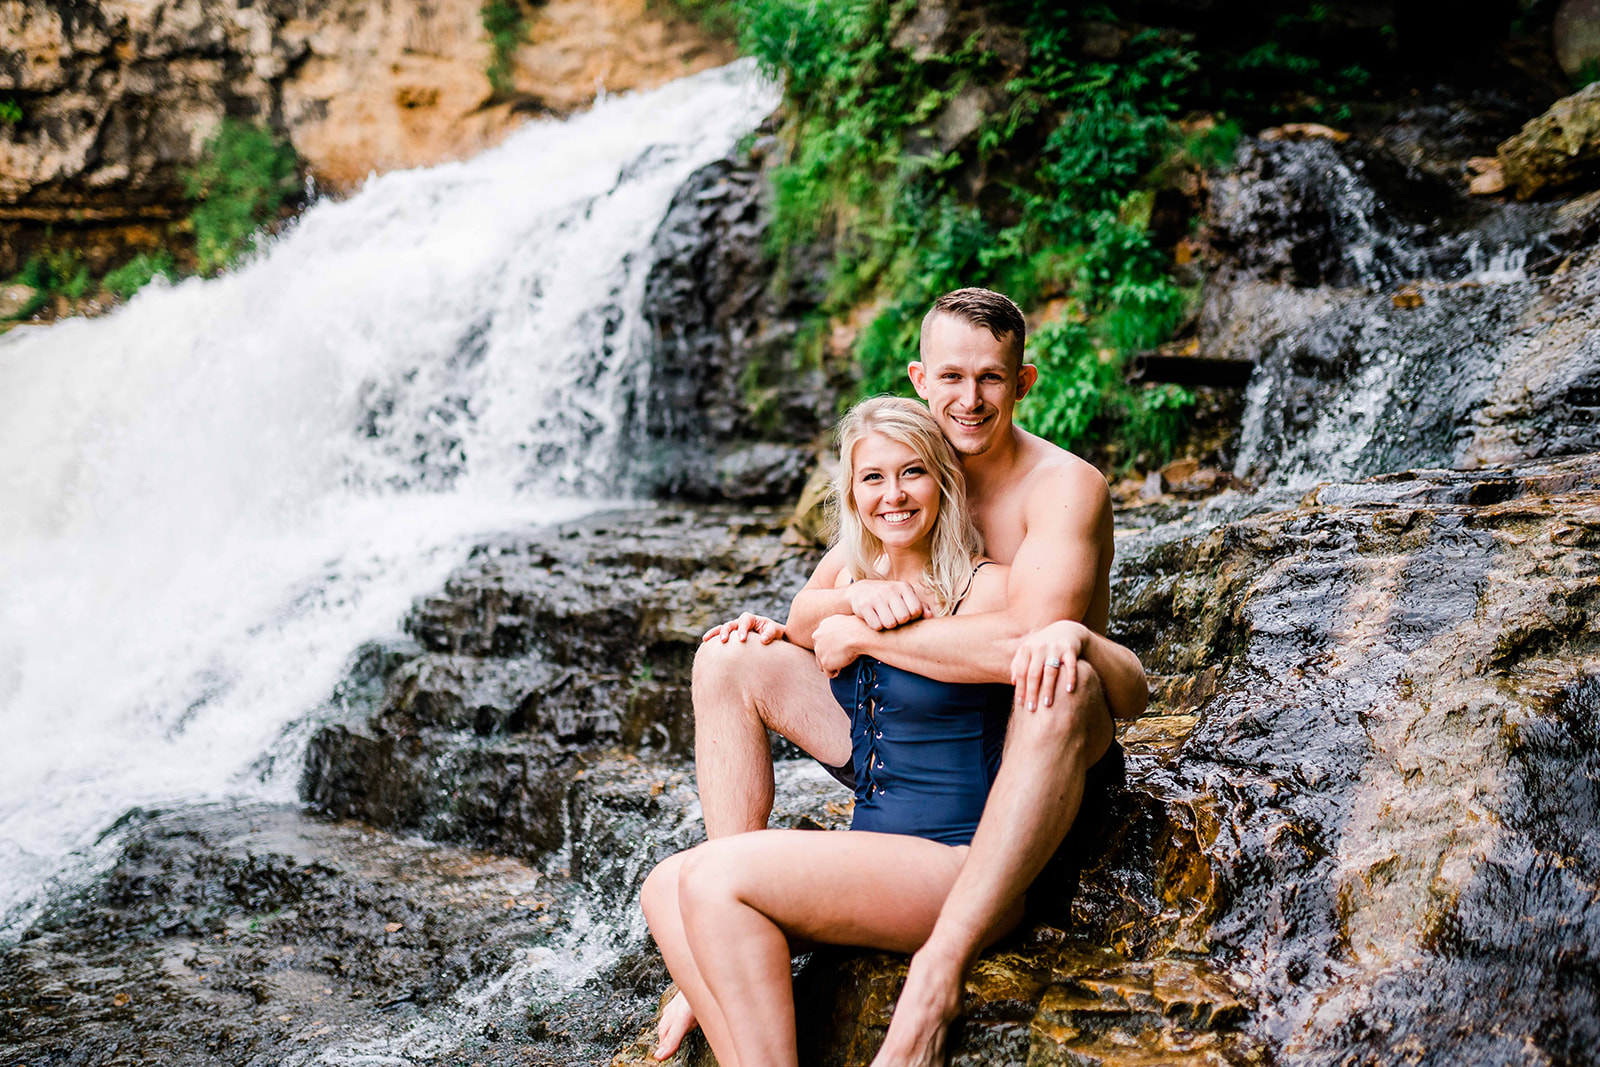 A smiling couple sits beside a picturesque waterfall in Wisconsin, their happiness evident as they pose for the camera against the backdrop of nature's beauty.